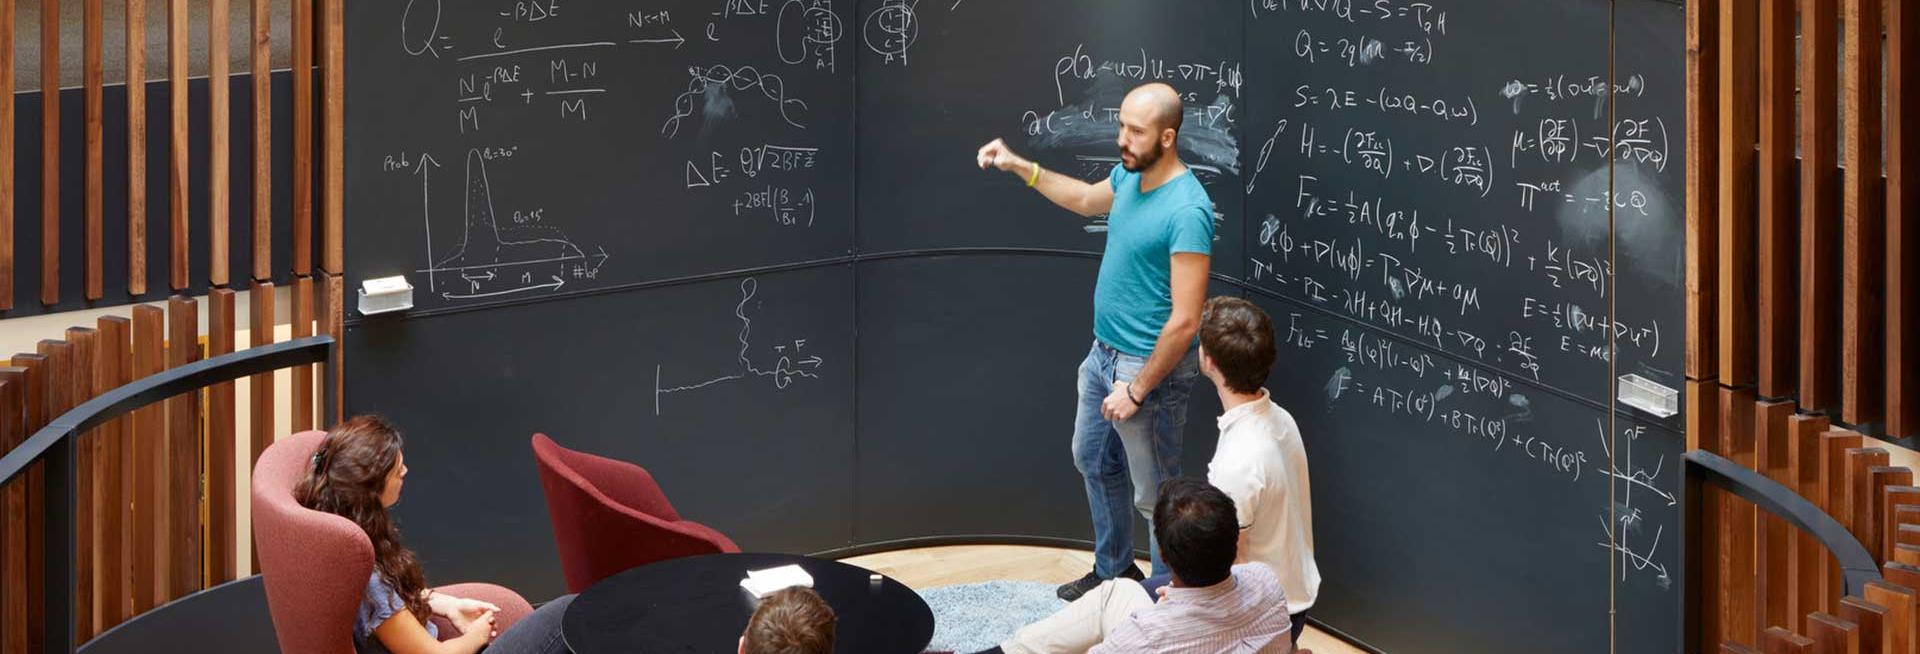 People sitting and standing around a blackboard discussing physics problems